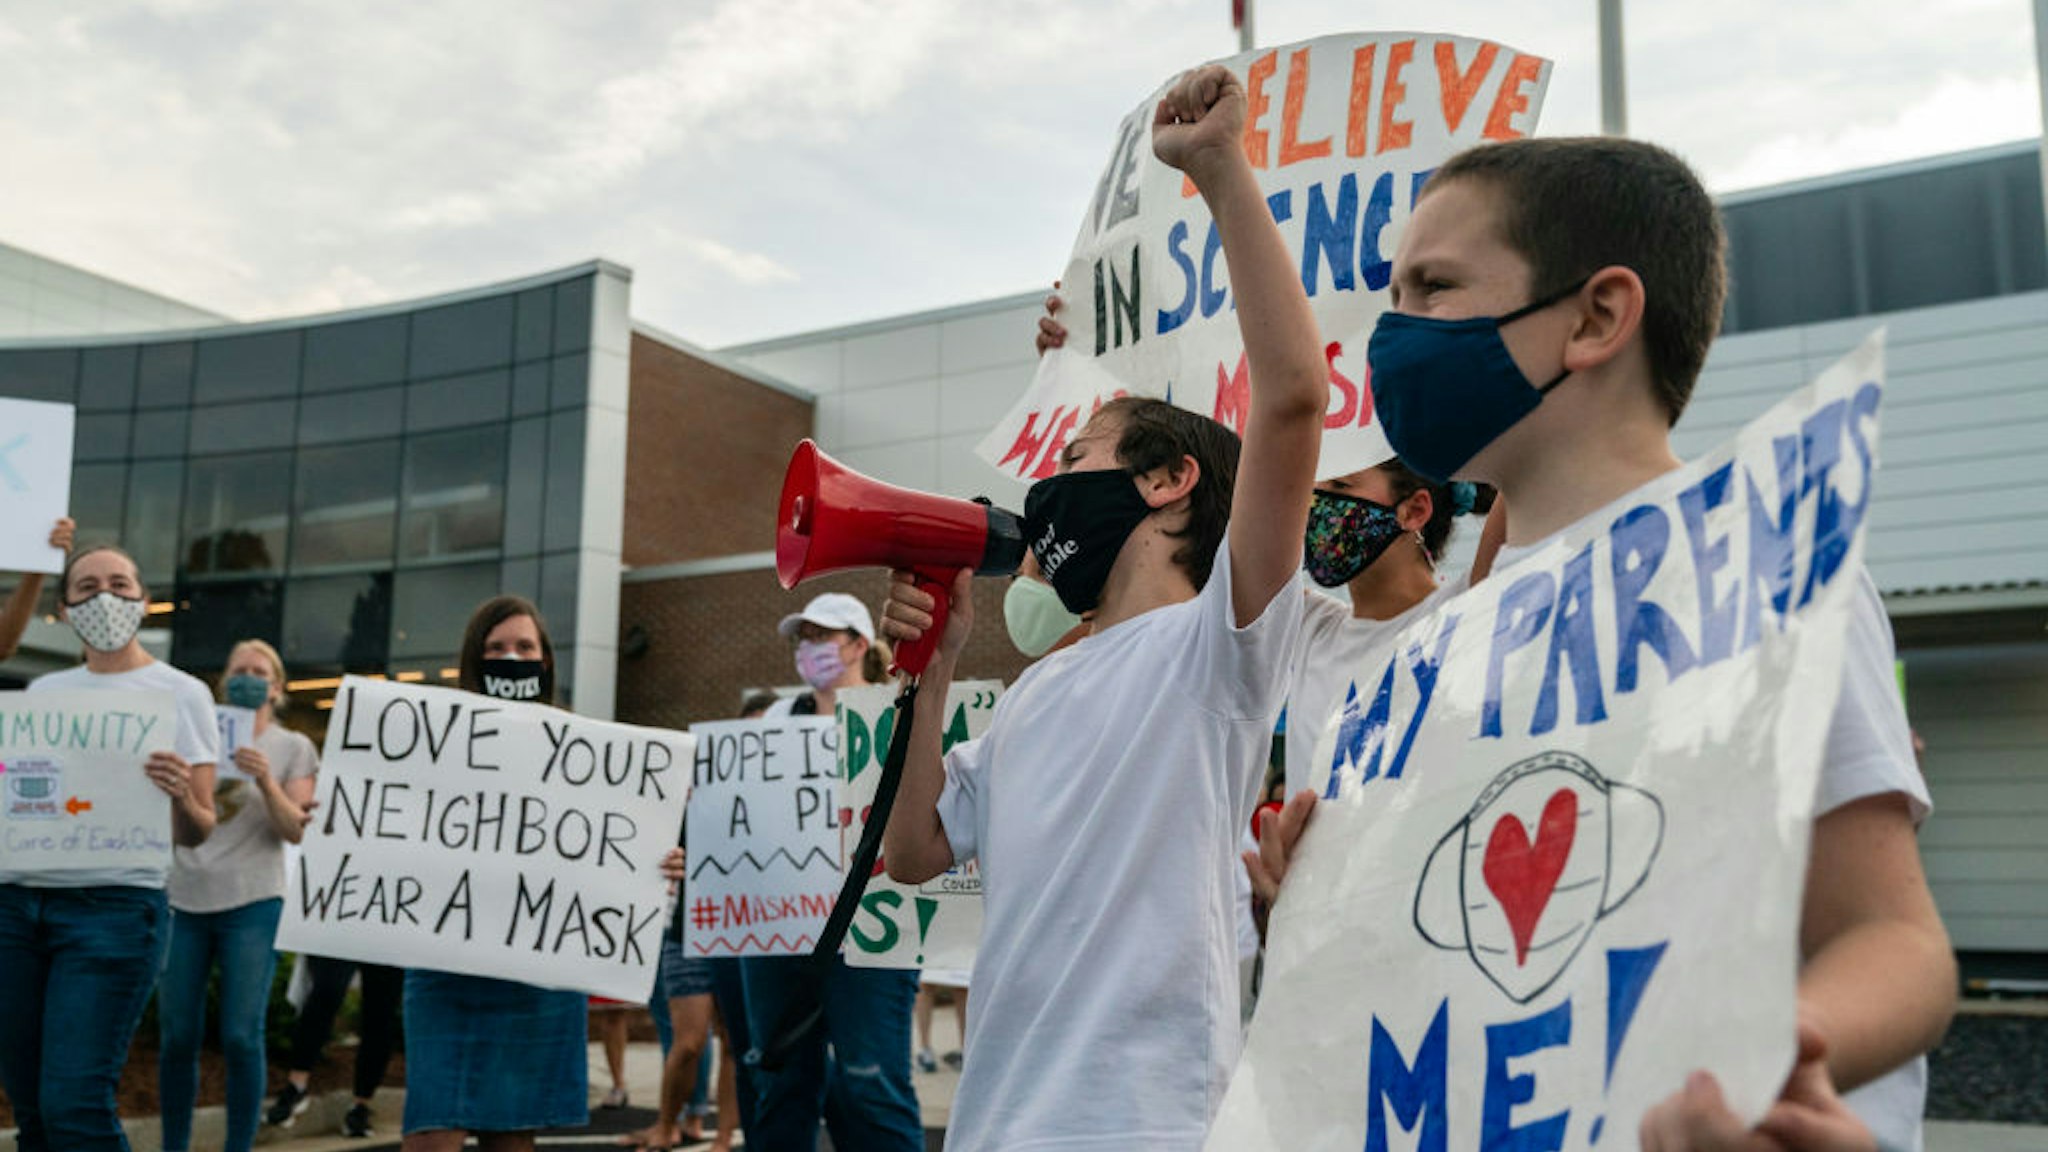 A pro-mask demonstrator with a megaphone speaks during a rally over Cobb School District's optional mask policy in Marietta, Georgia, U.S., on Thursday, Aug. 19, 2021. More than 200 doctors signed a letter asking the Cobb County School District to re-impose a mask mandate due to a surge in COVID-19 cases in the community, reported the Atlanta Journal-Constitution. Photographer: Elijah Nouvelage/Bloomberg via Getty Images